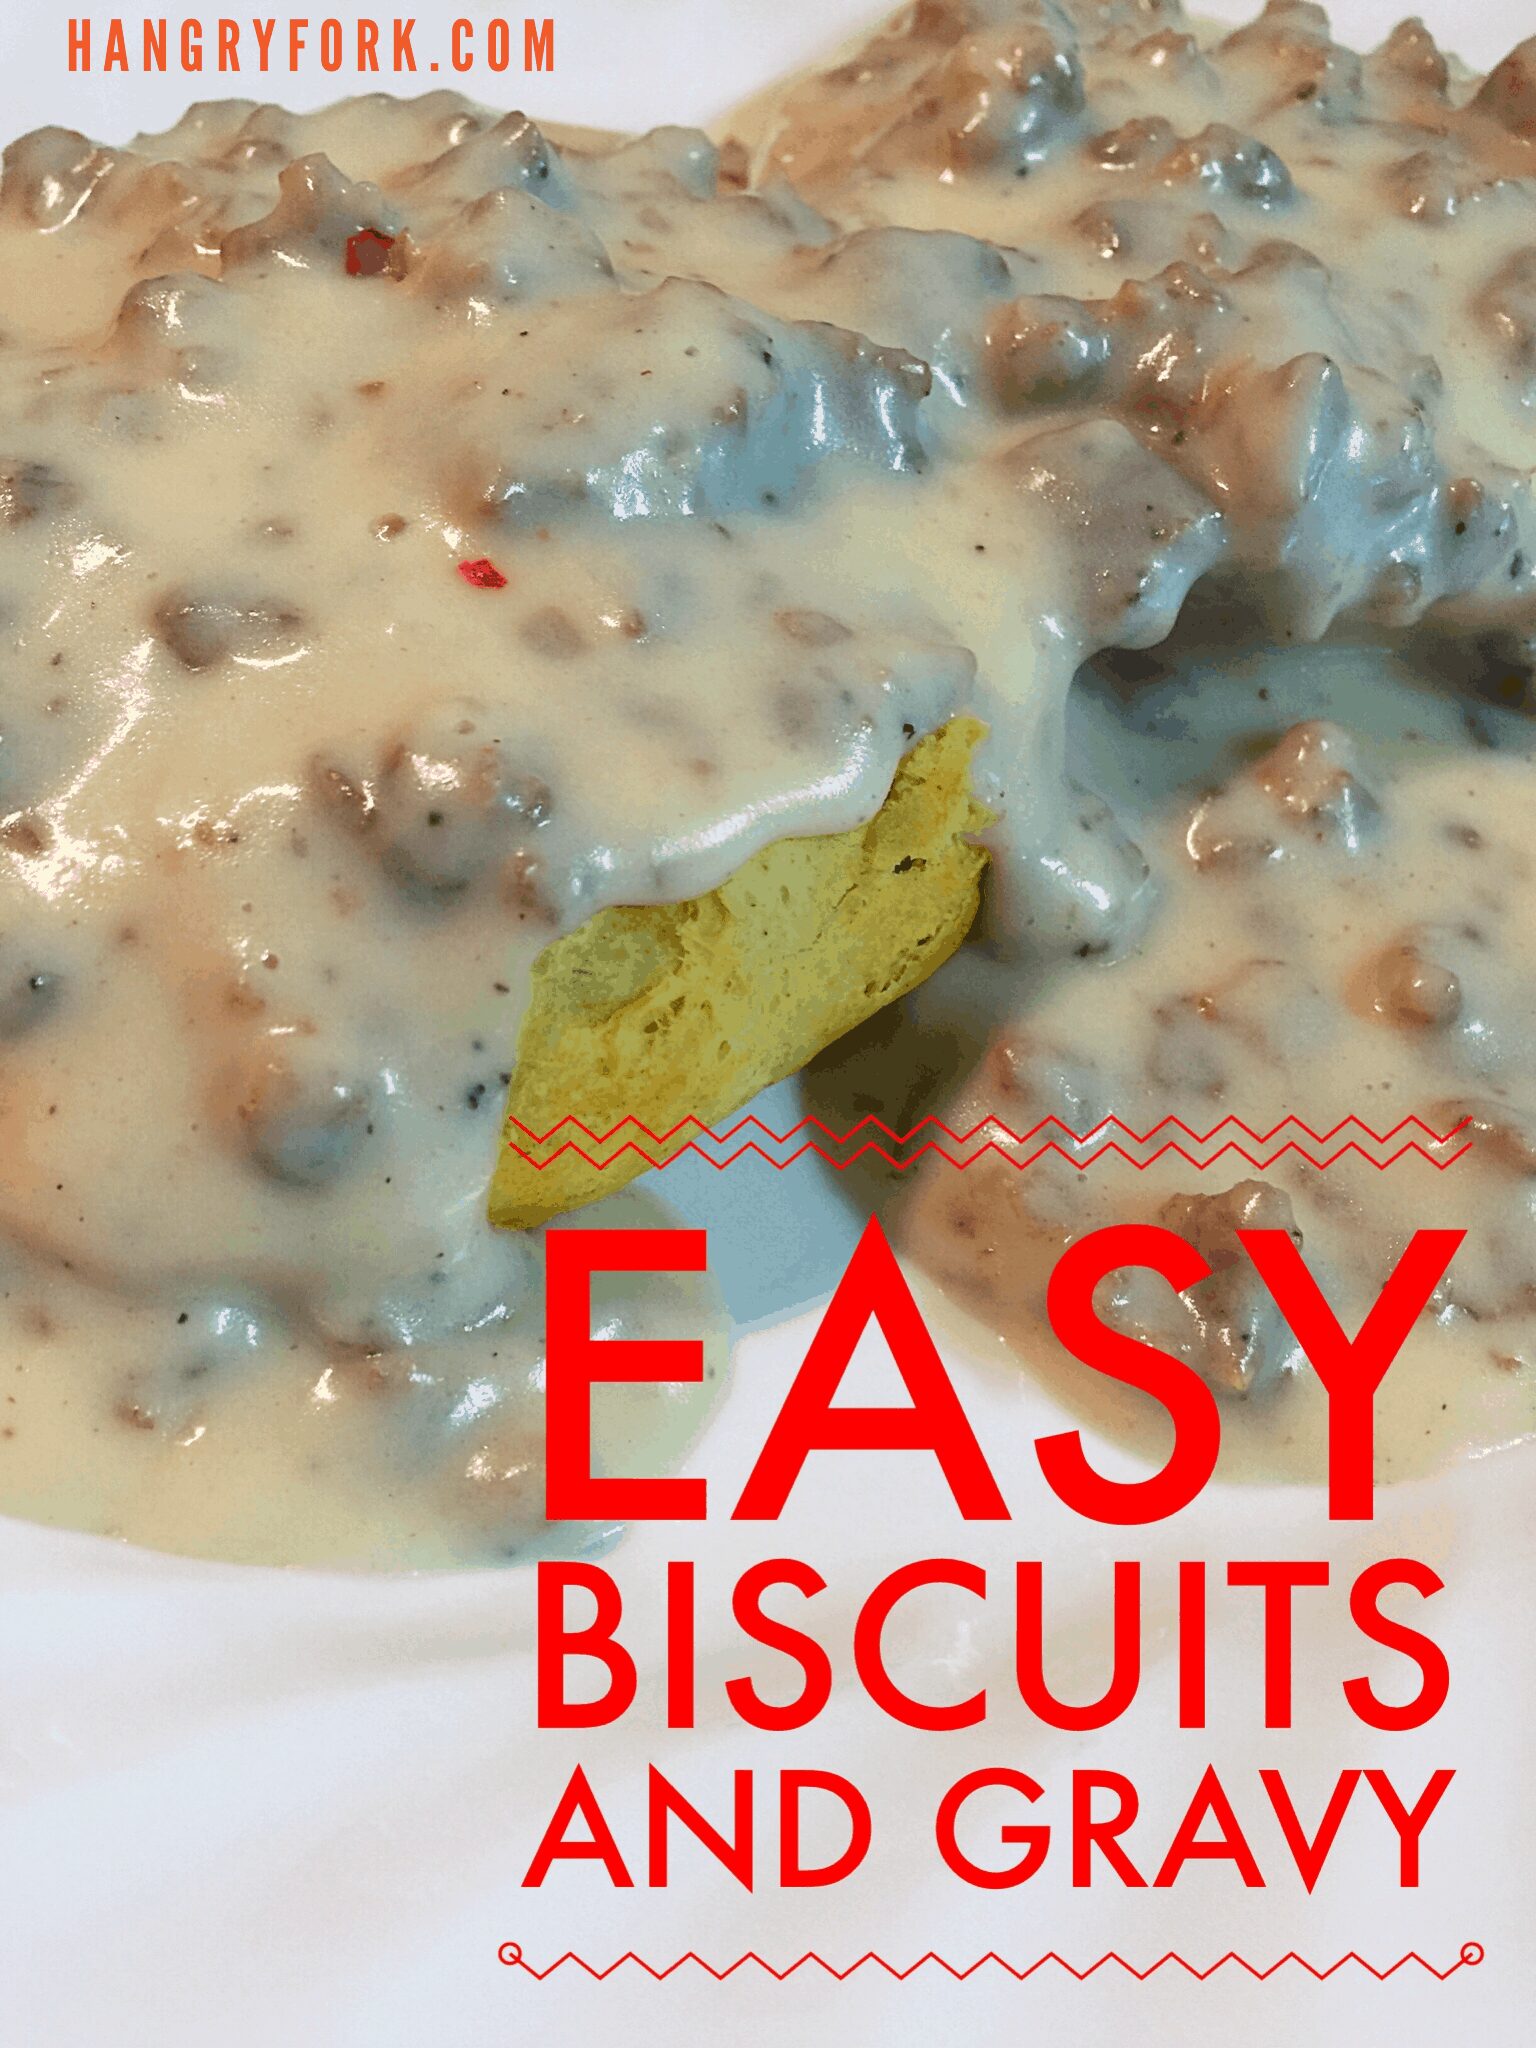 Easy Biscuits and Gravy Recipe